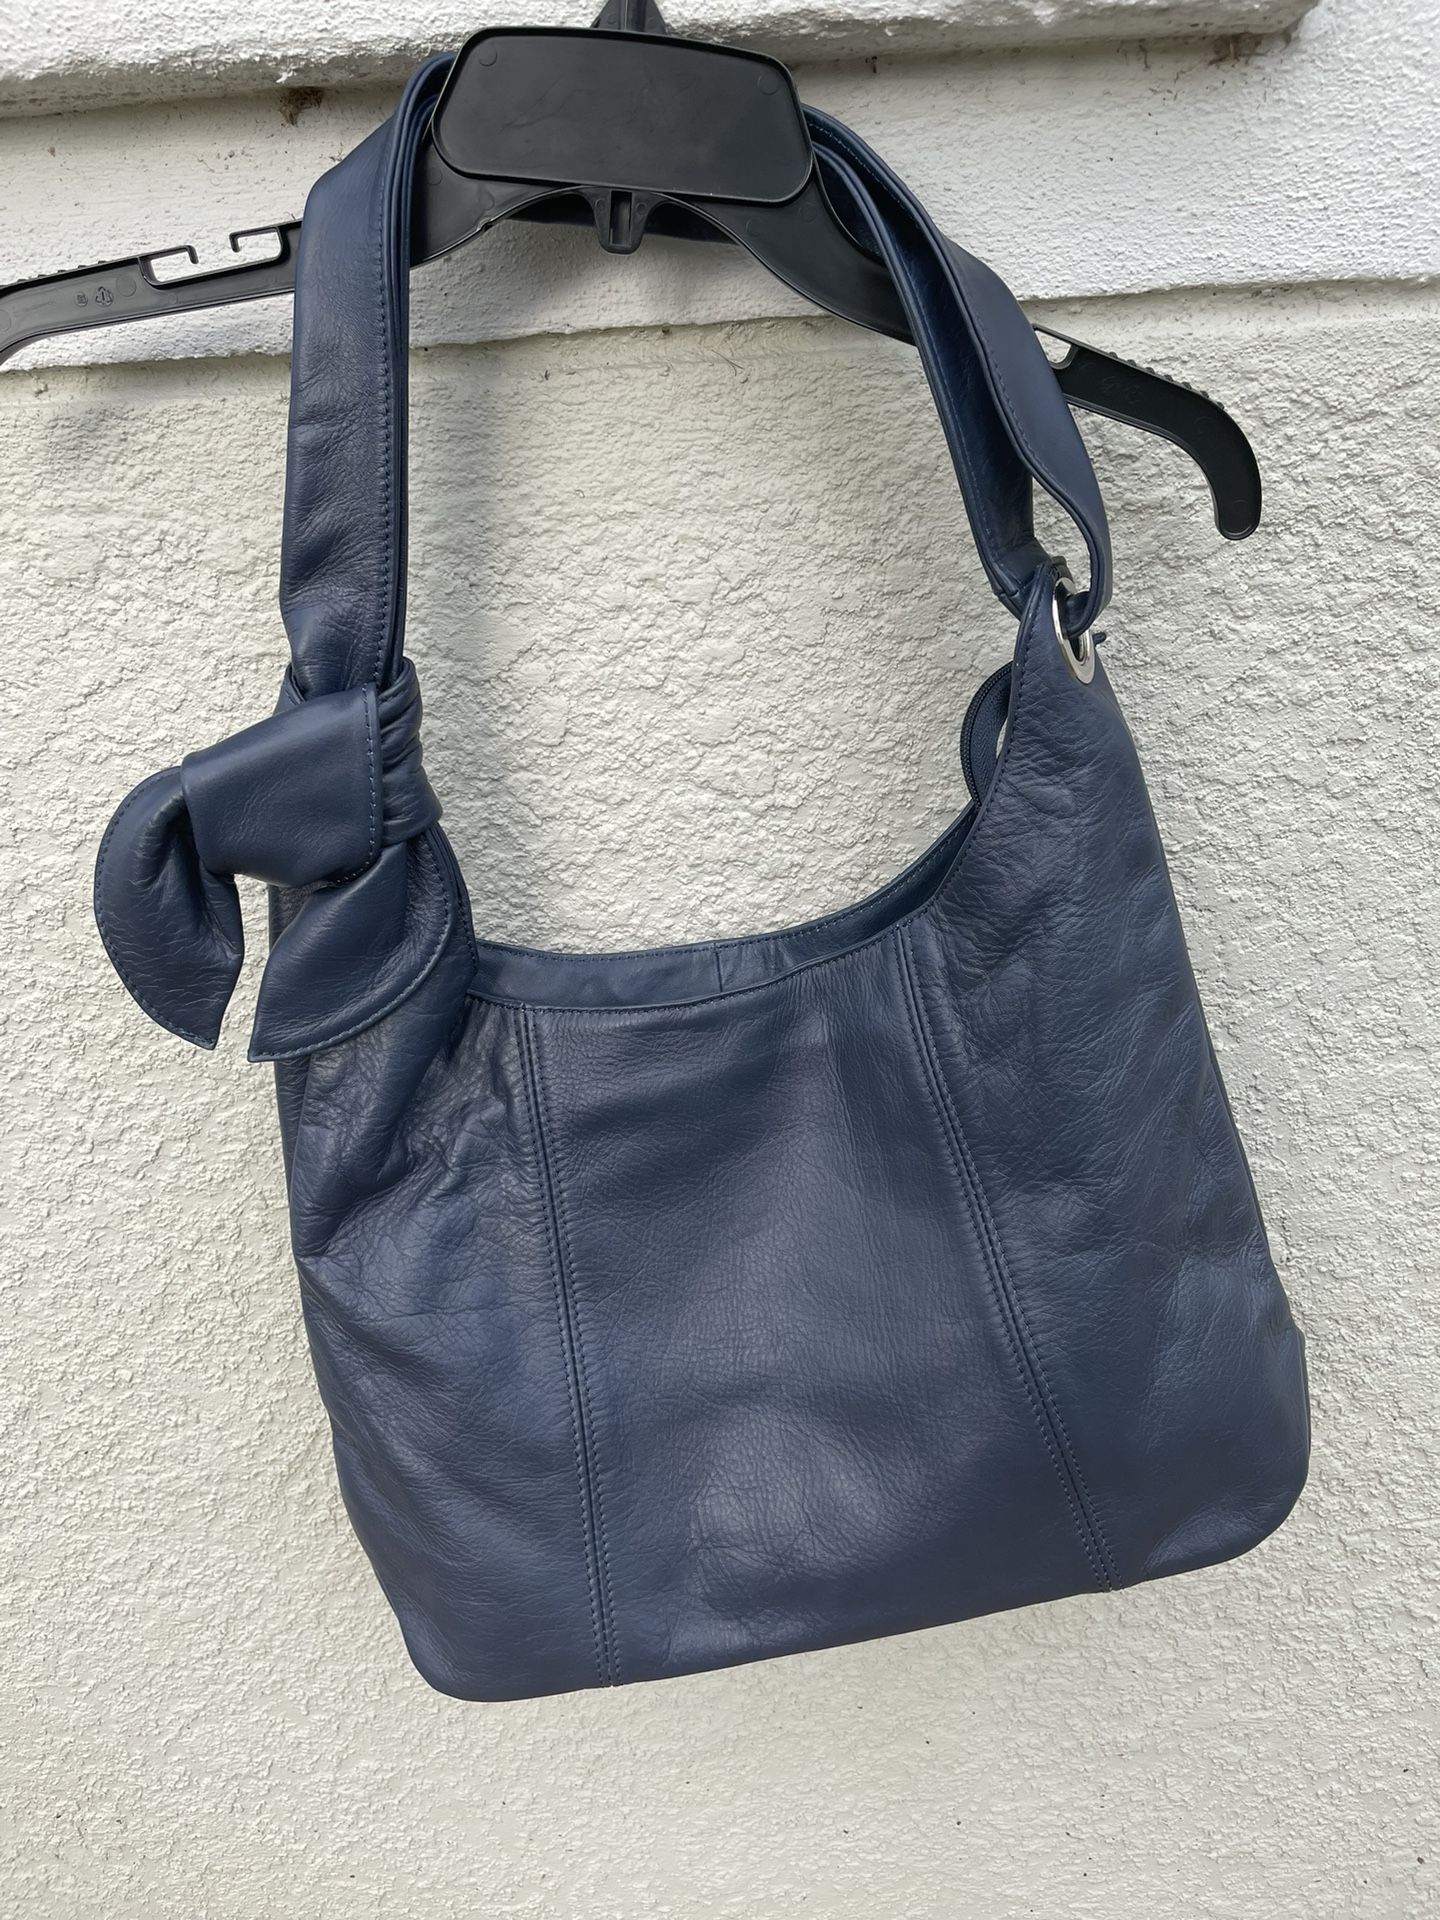 New! Leather Blue Bag